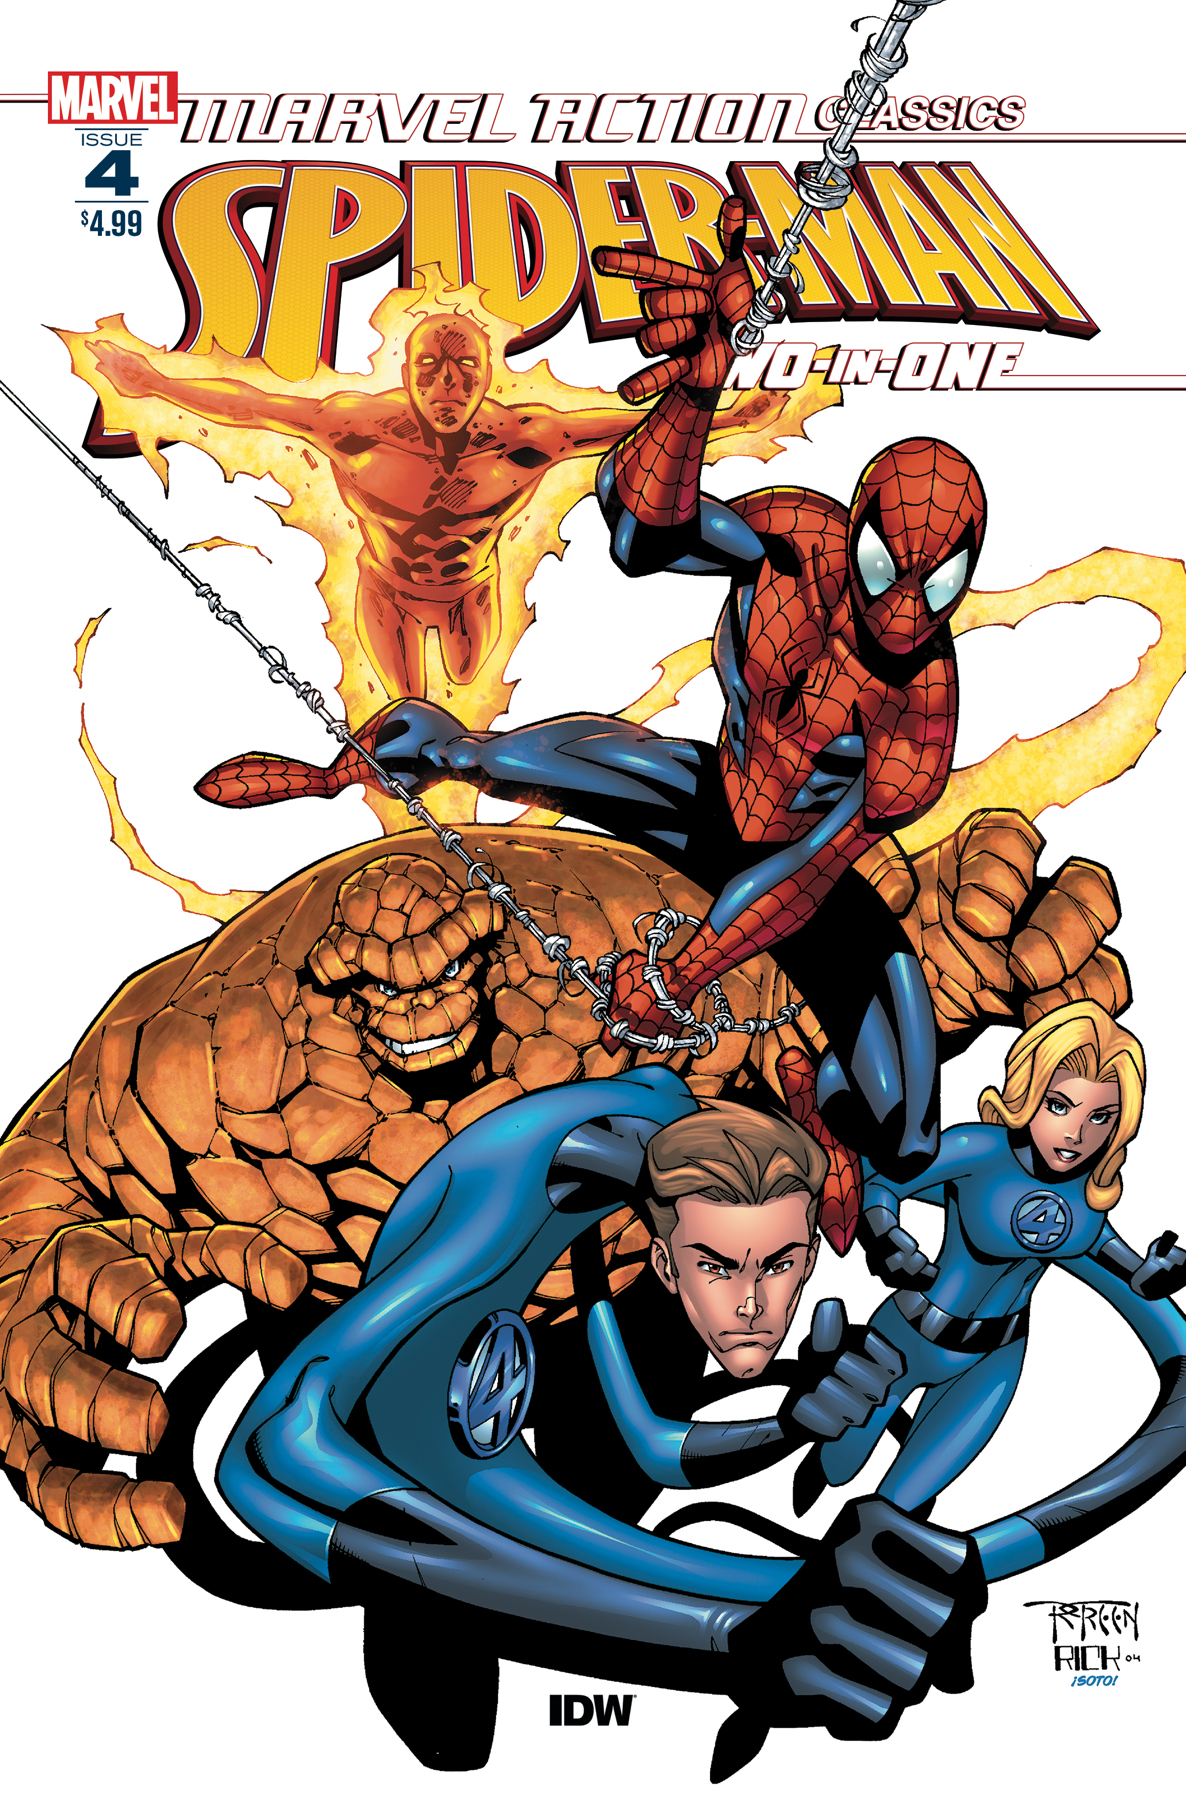 Marvel Action Classics Spider-Man Two In One #4